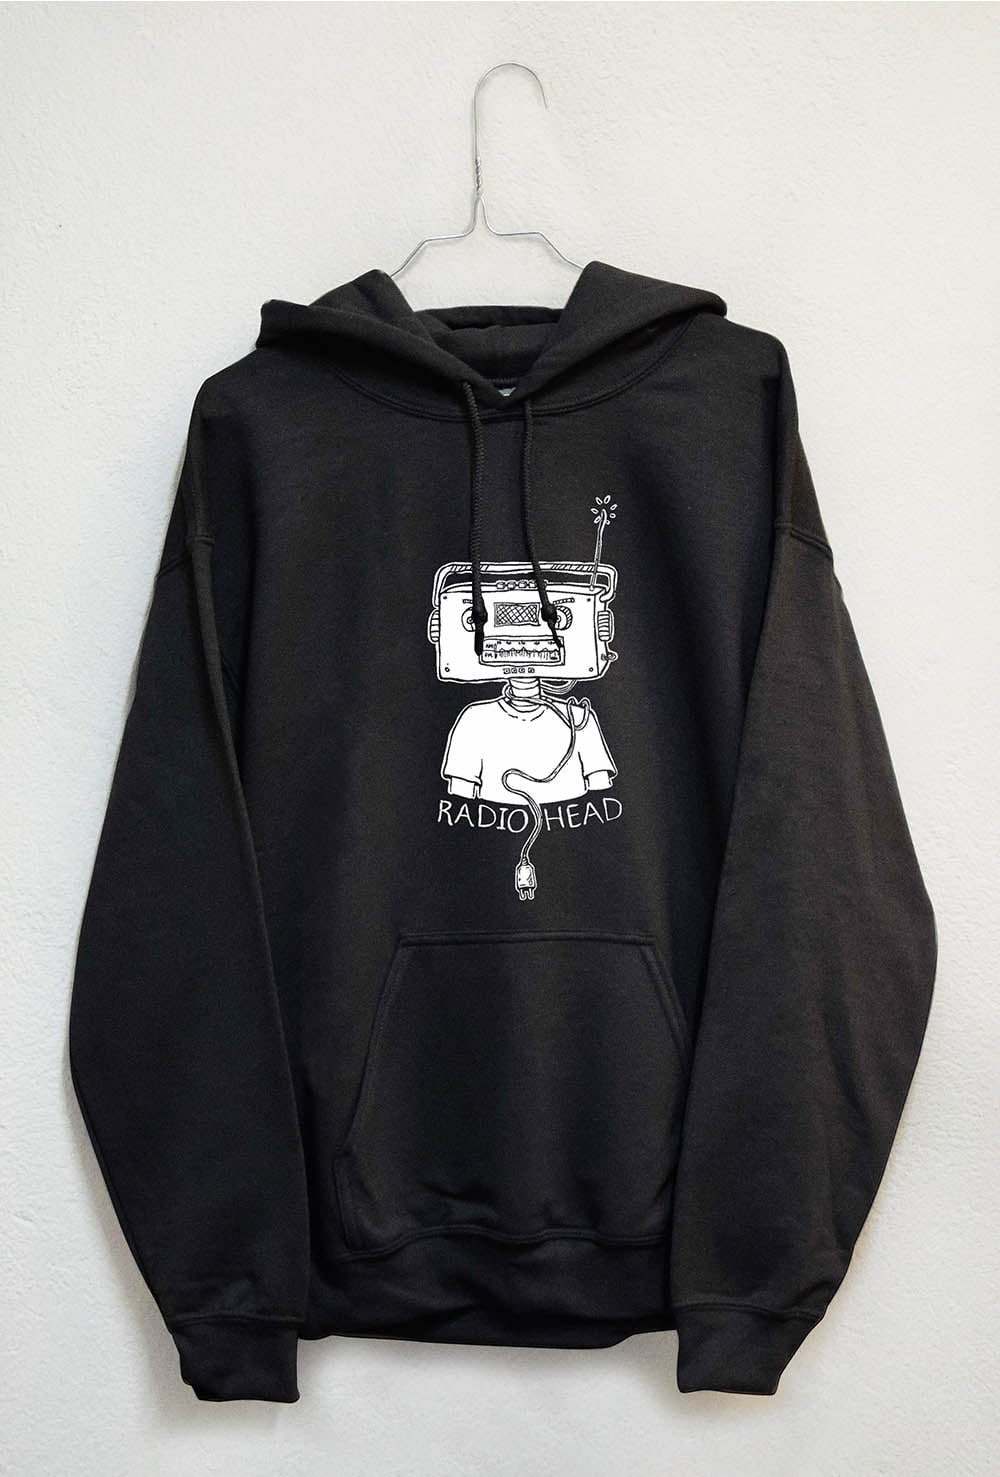 Subworks carchoal hoodies with radiohead